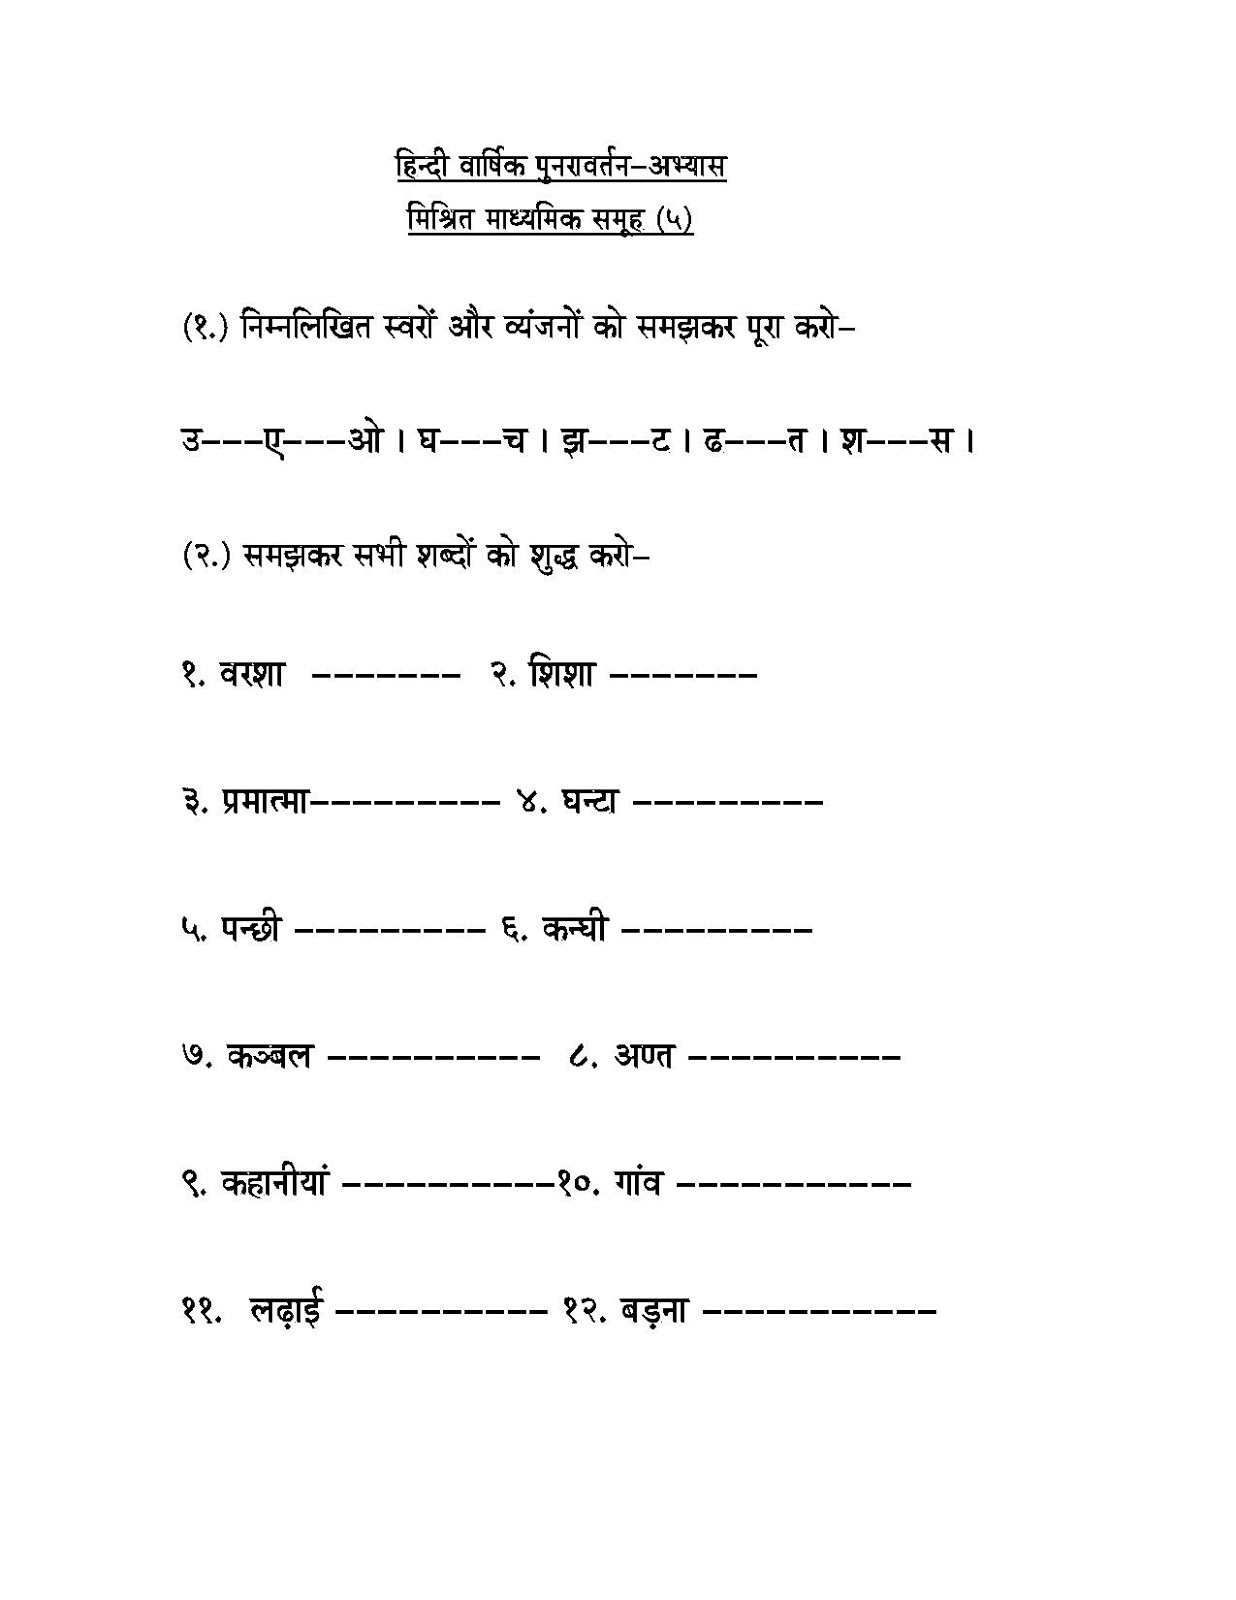 5th-grade-hindi-grammar-worksheets-for-class-5-with-answers-tutore-org-master-of-documents